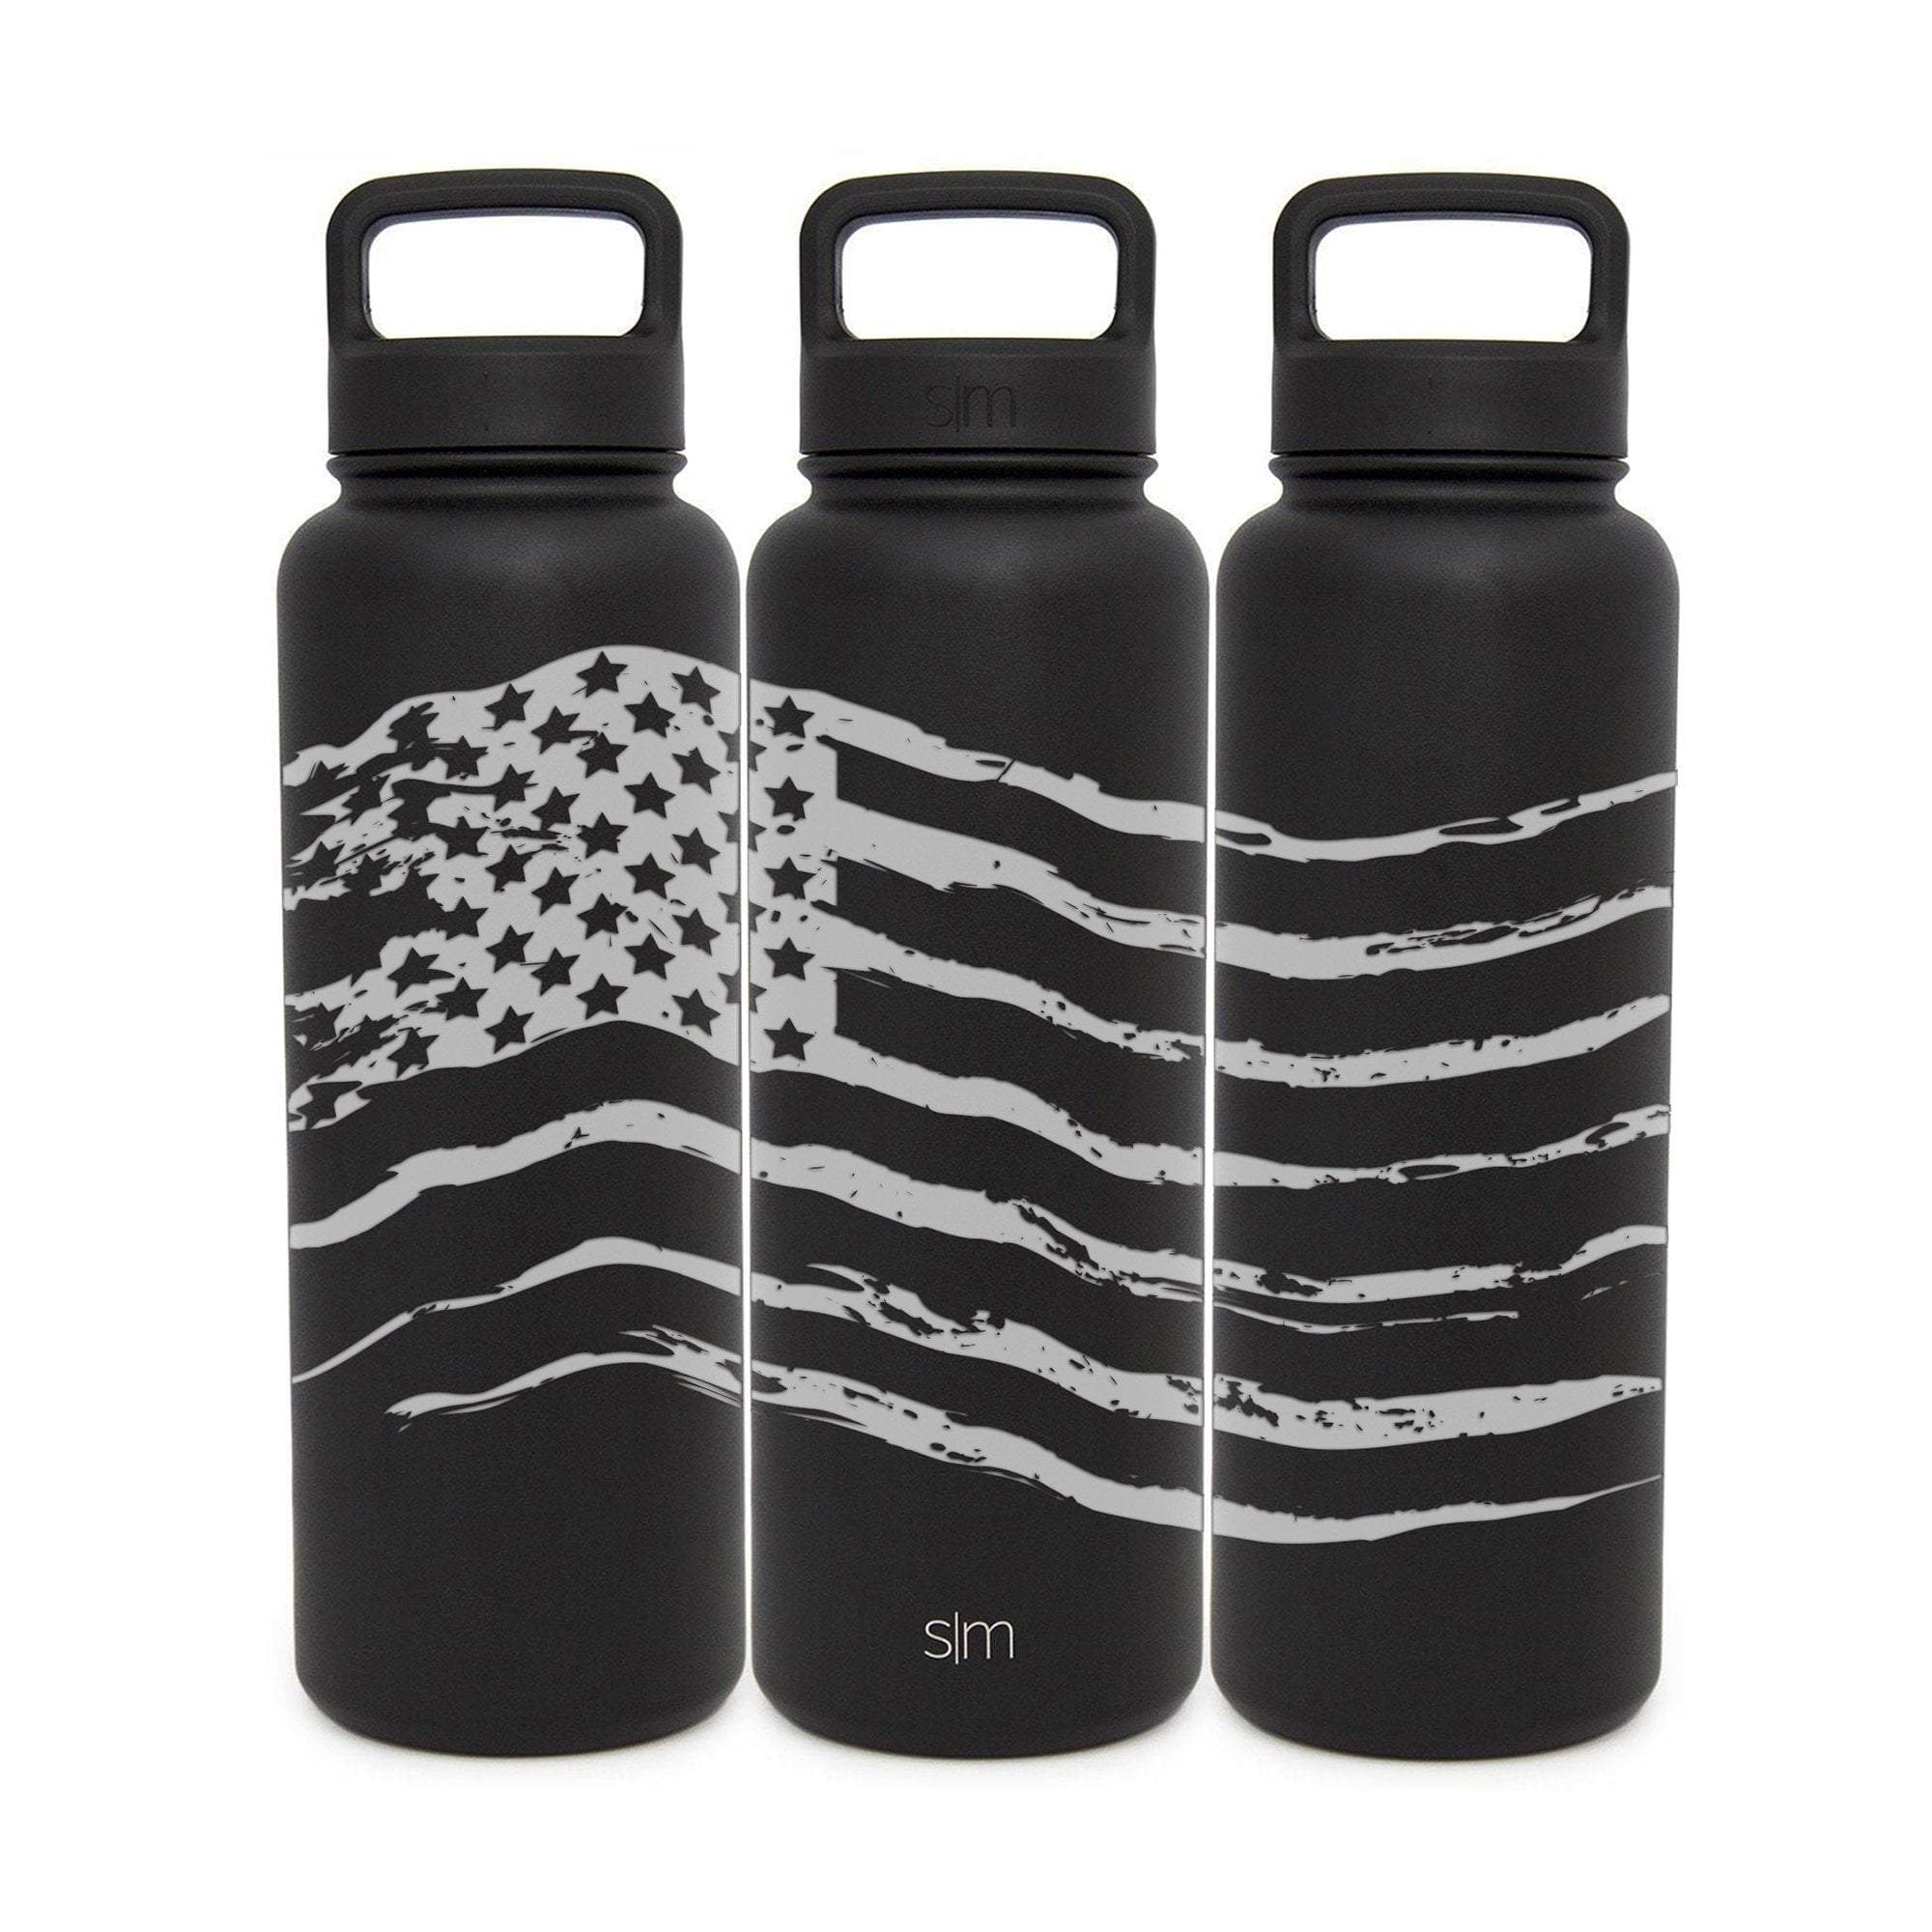 https://cdn.shopify.com/s/files/1/1400/5987/products/full-360-all-american-flag-stainless-steel-40-oz-midnight-black-water-bottle-with-extra-lid-by-leitlein-design-integrity-bottles-16114211061859_2000x.jpg?v=1601746122